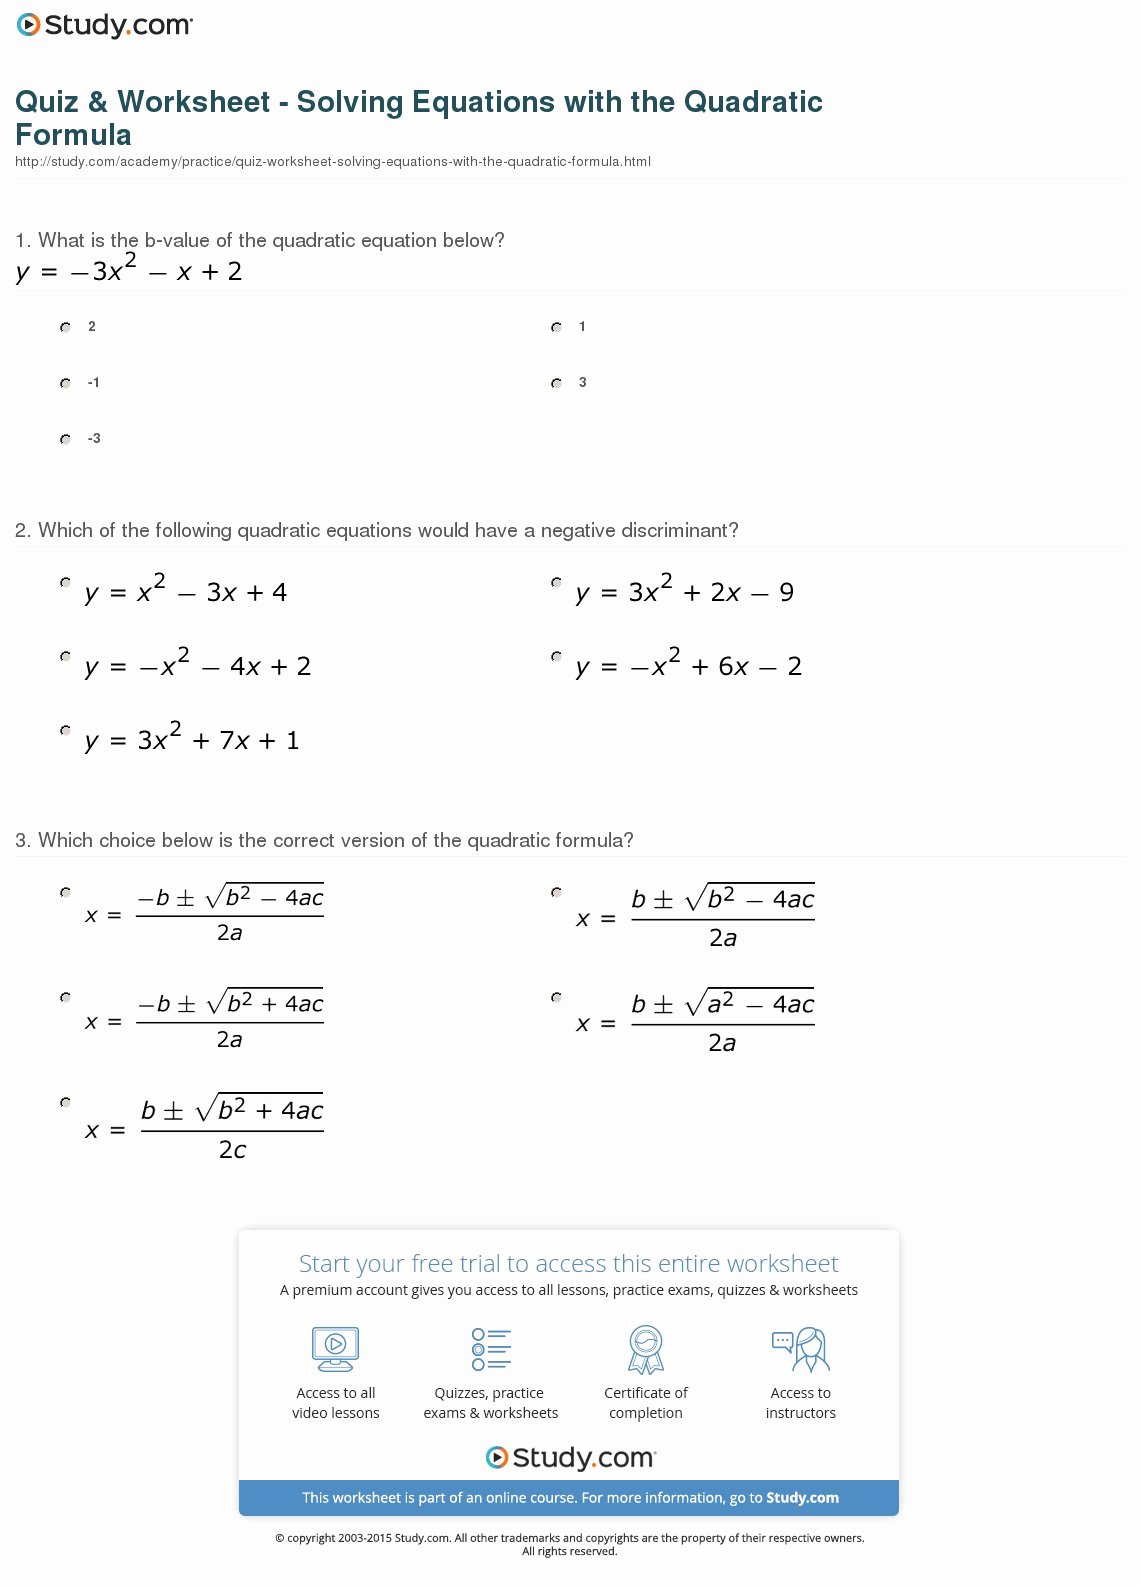 Characteristics Of Quadratic Functions Worksheet Luxury Piecewise Functions Worksheet with Answers Piecewise